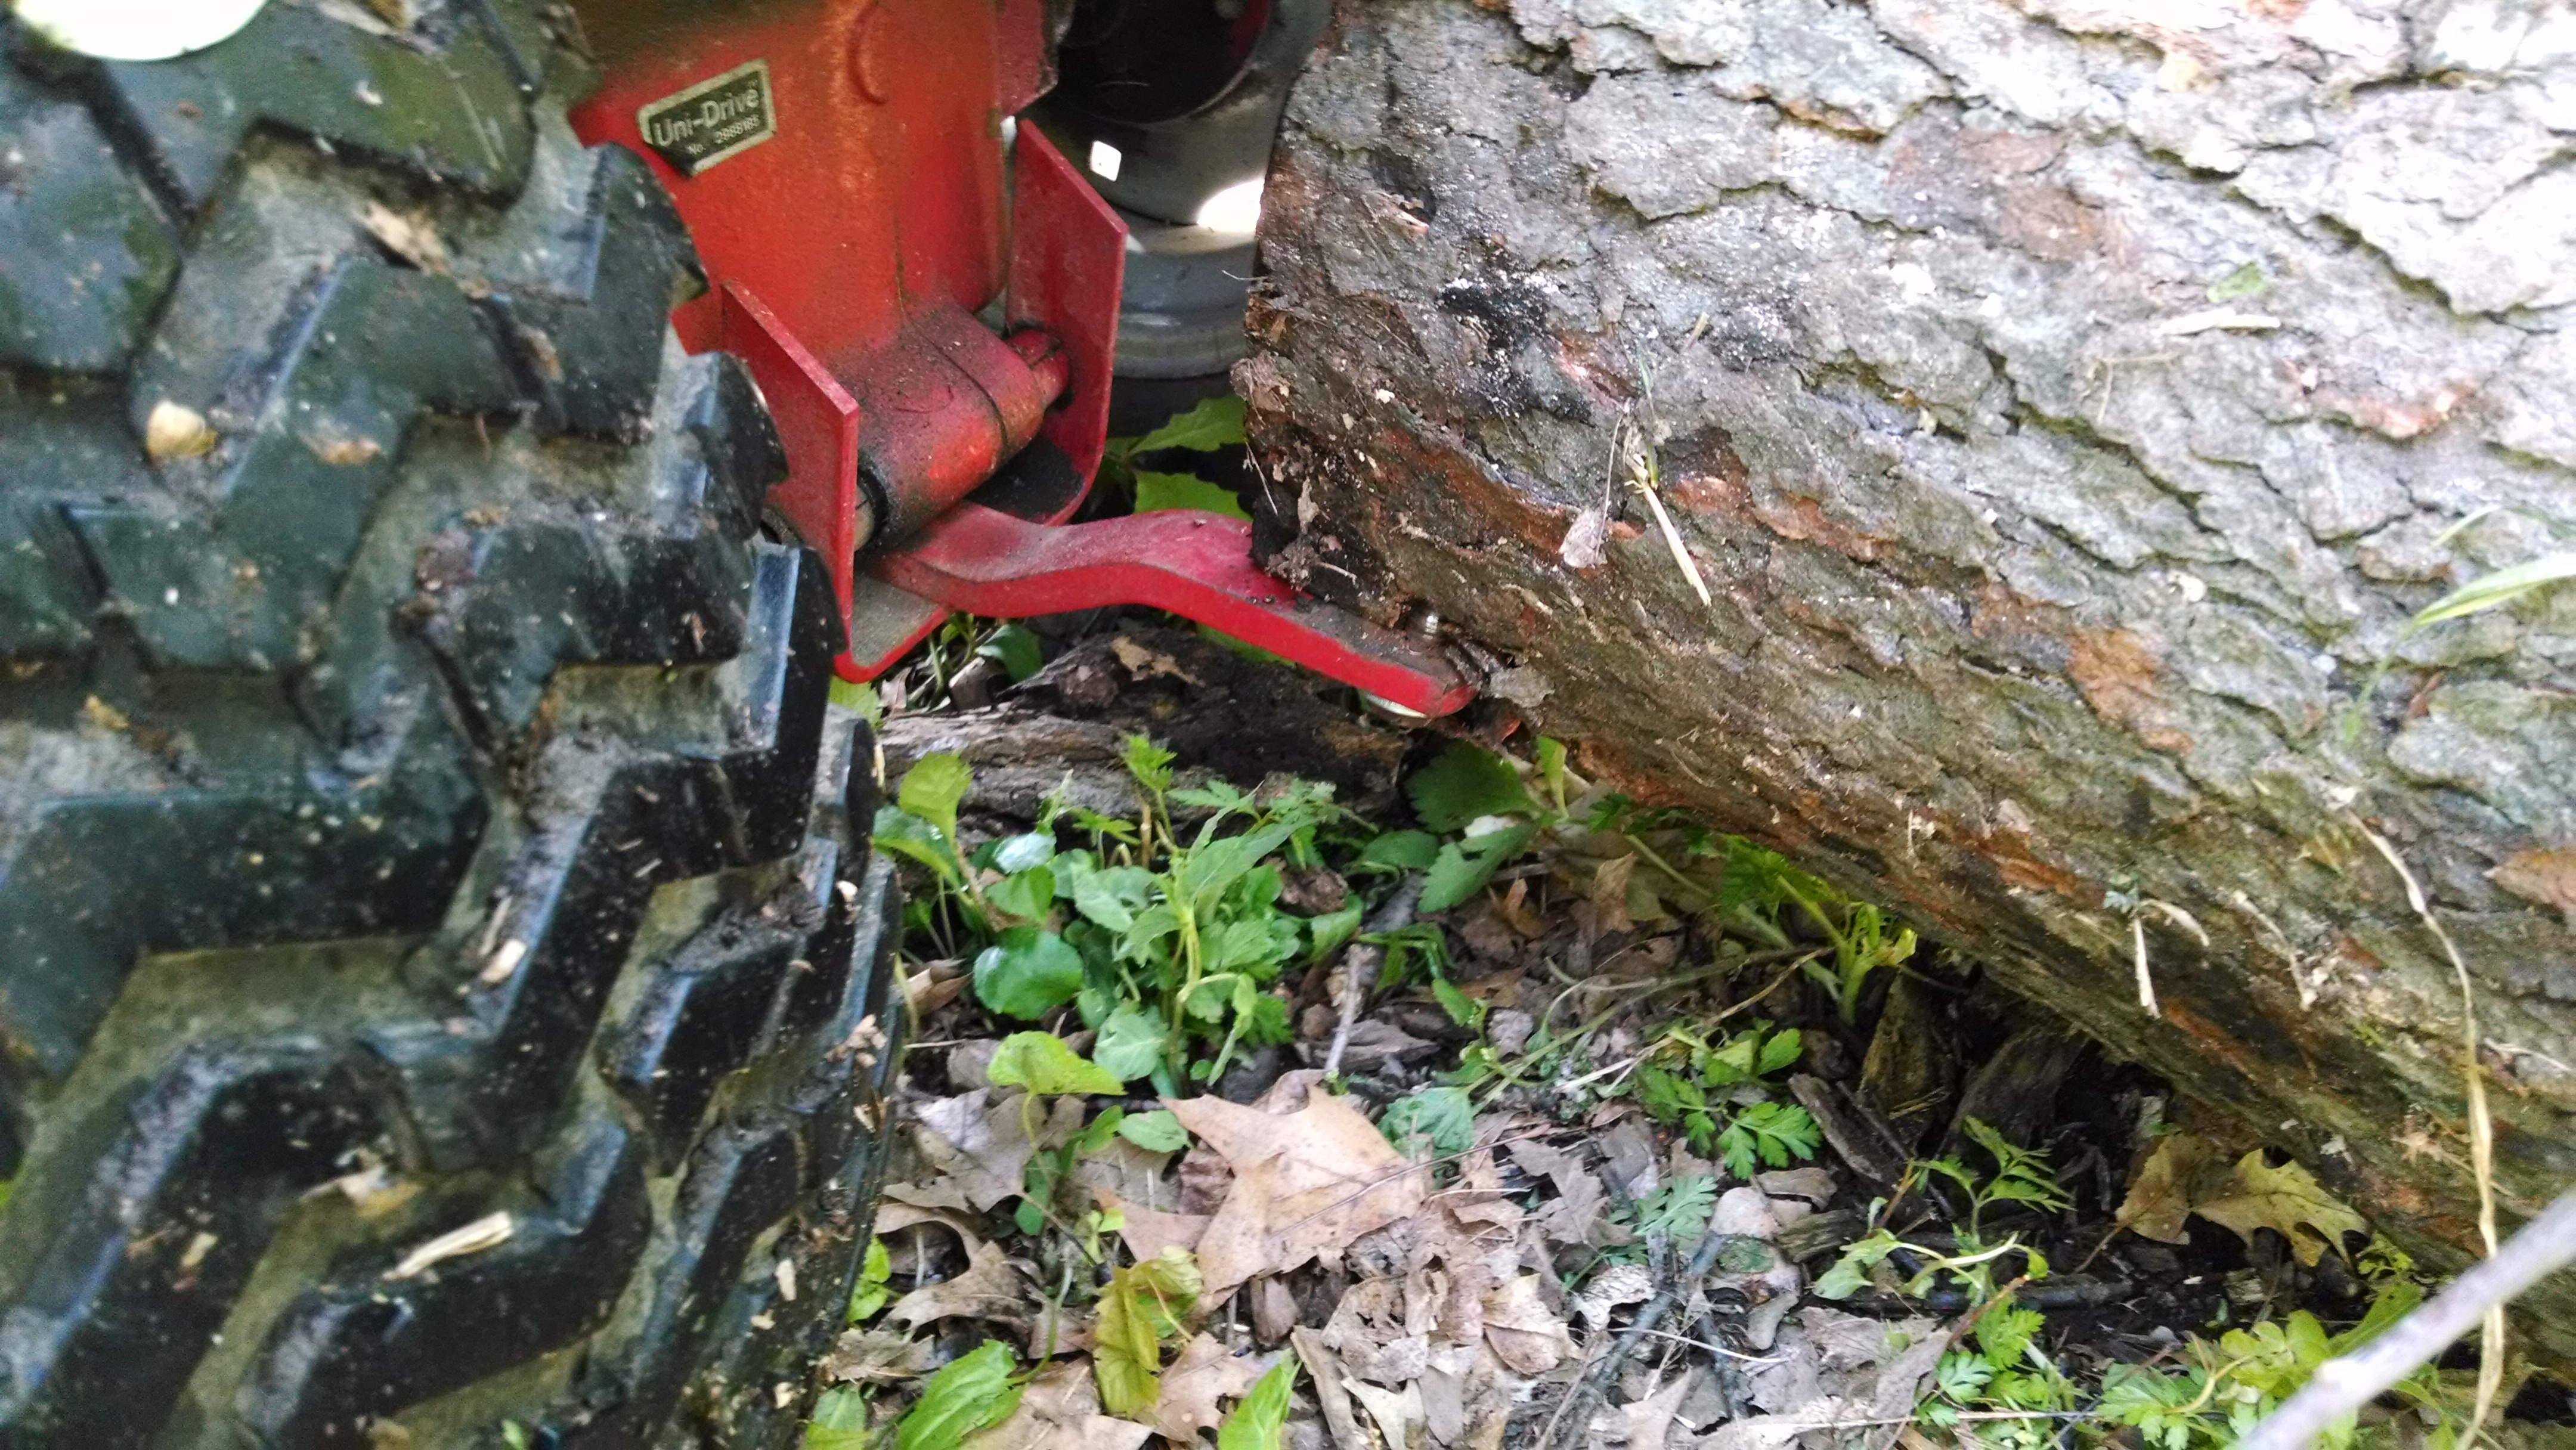 I was able to pull the first and lightest log by attaching it directly to the tongue of the lawnmower